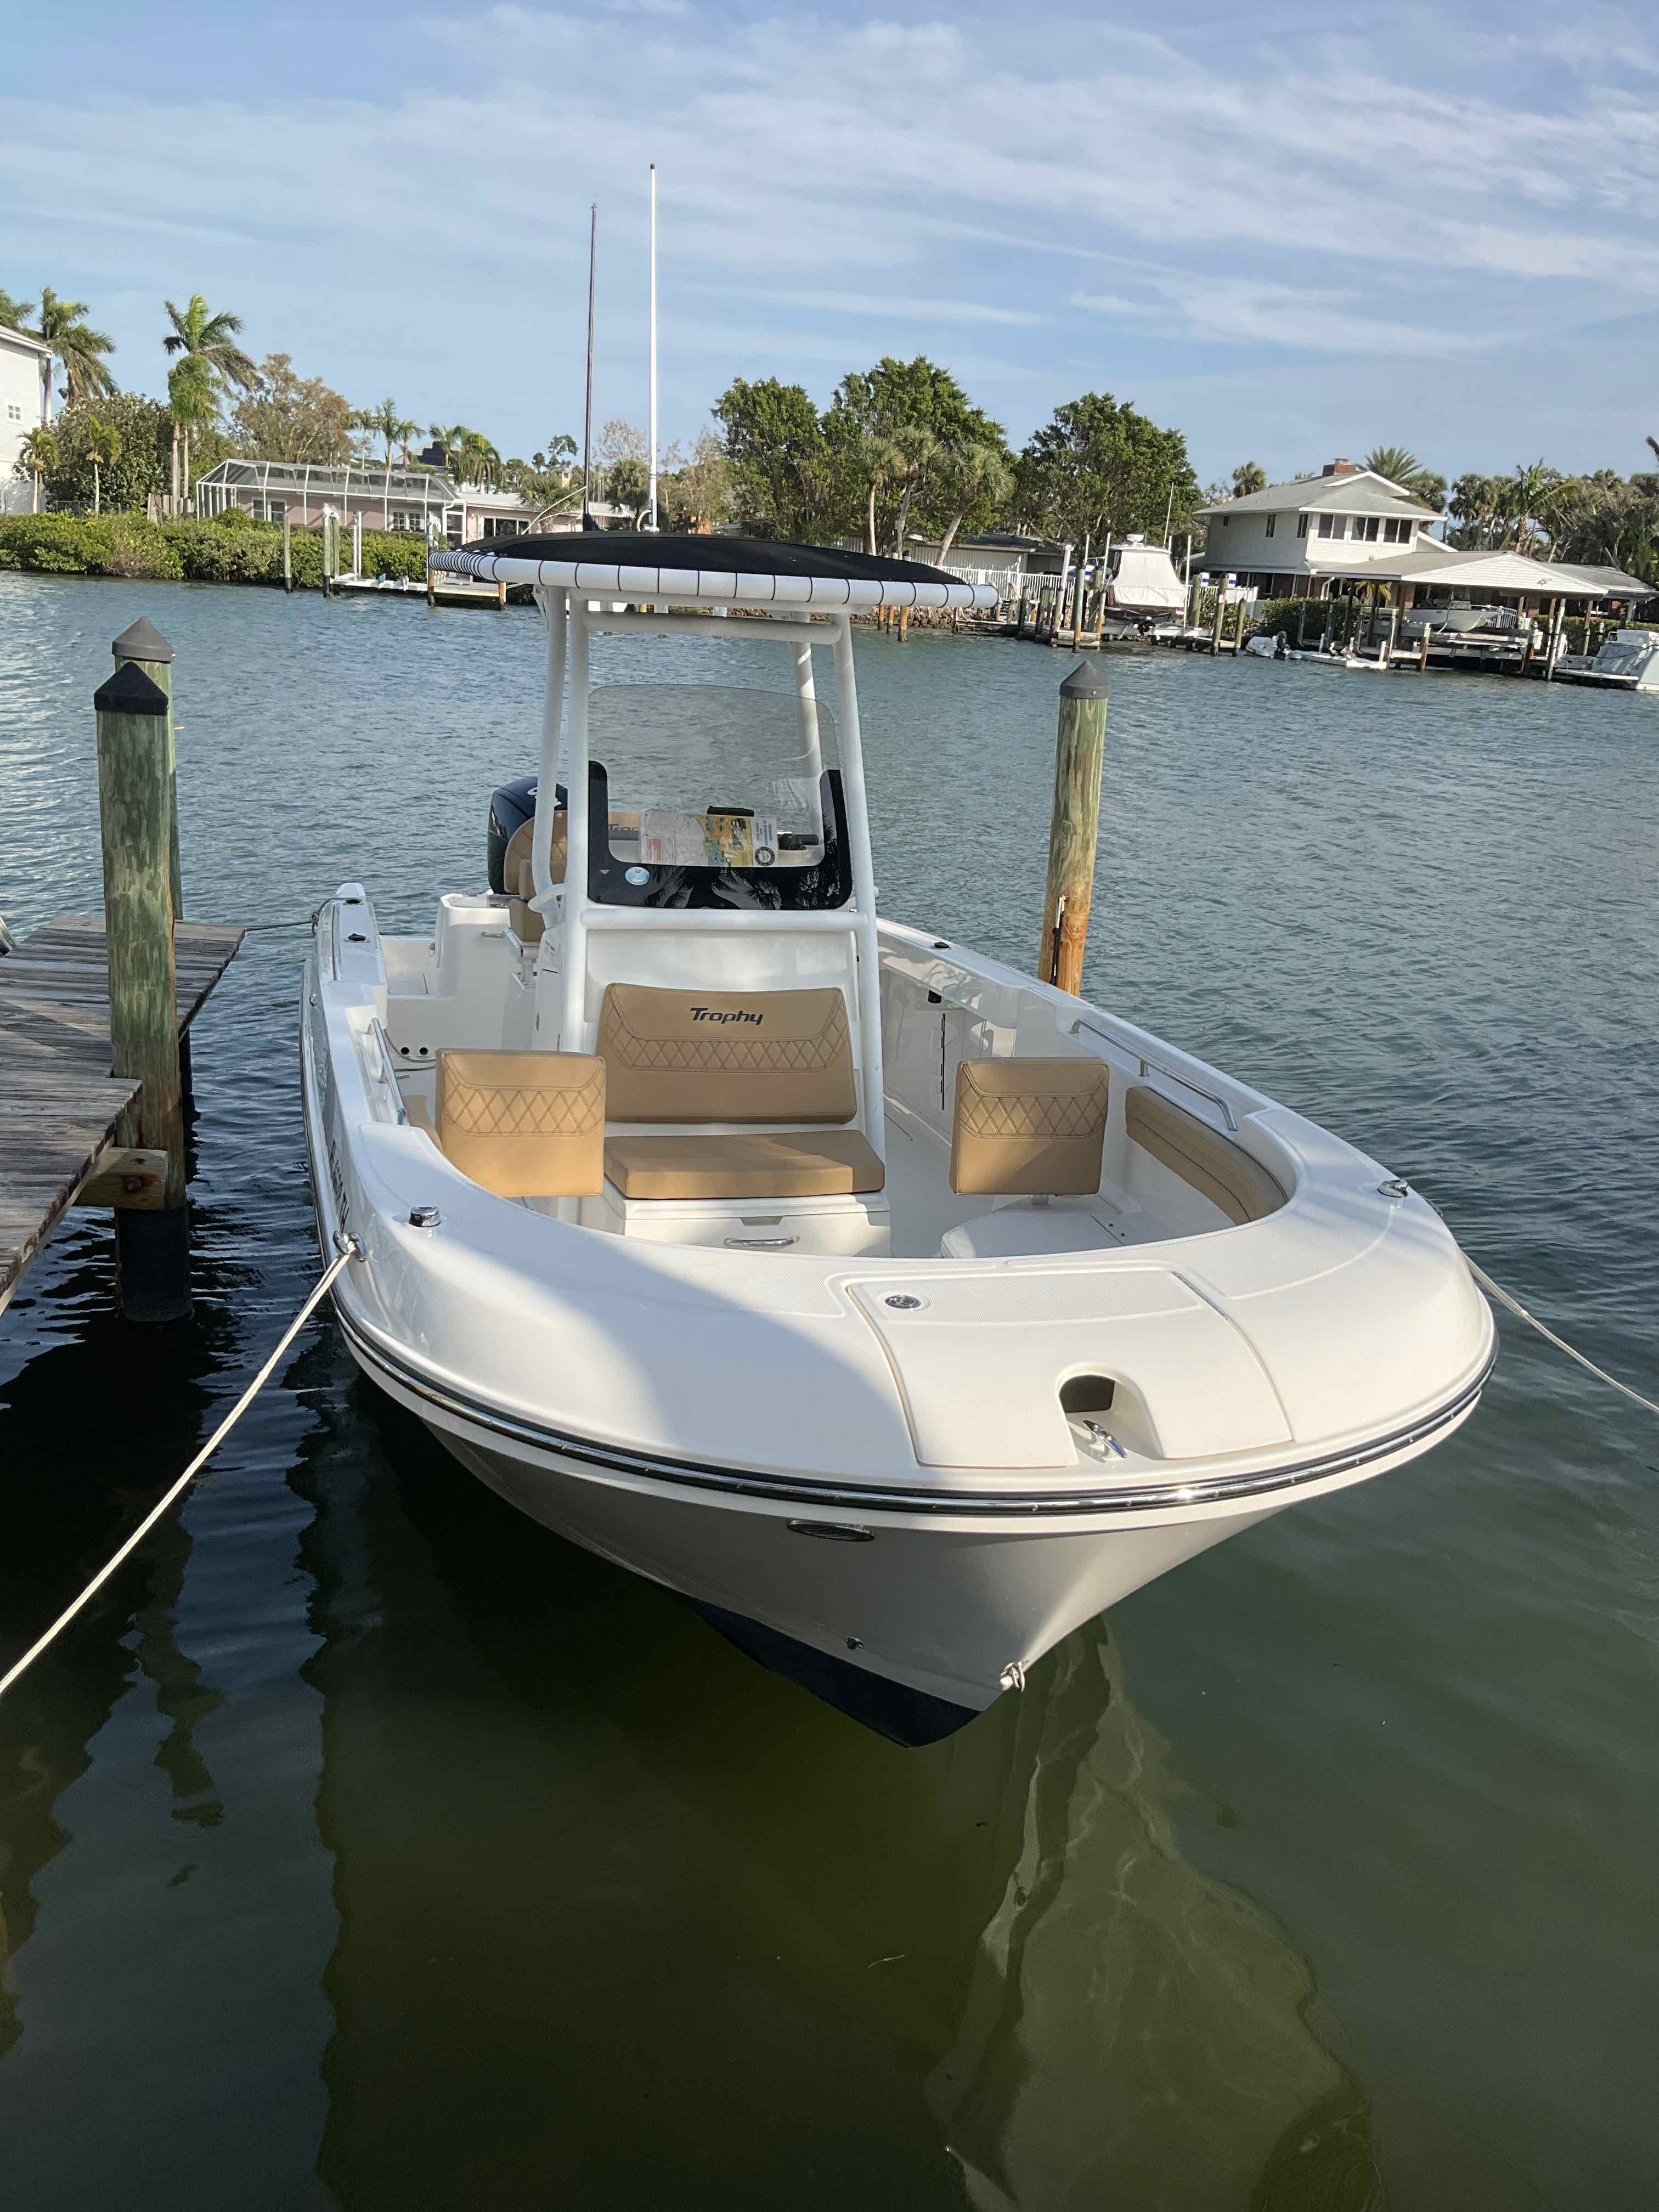 BAIT AND SWITCH (22FT Bayliner Trophy Center Console - 200 HP~Fishing)